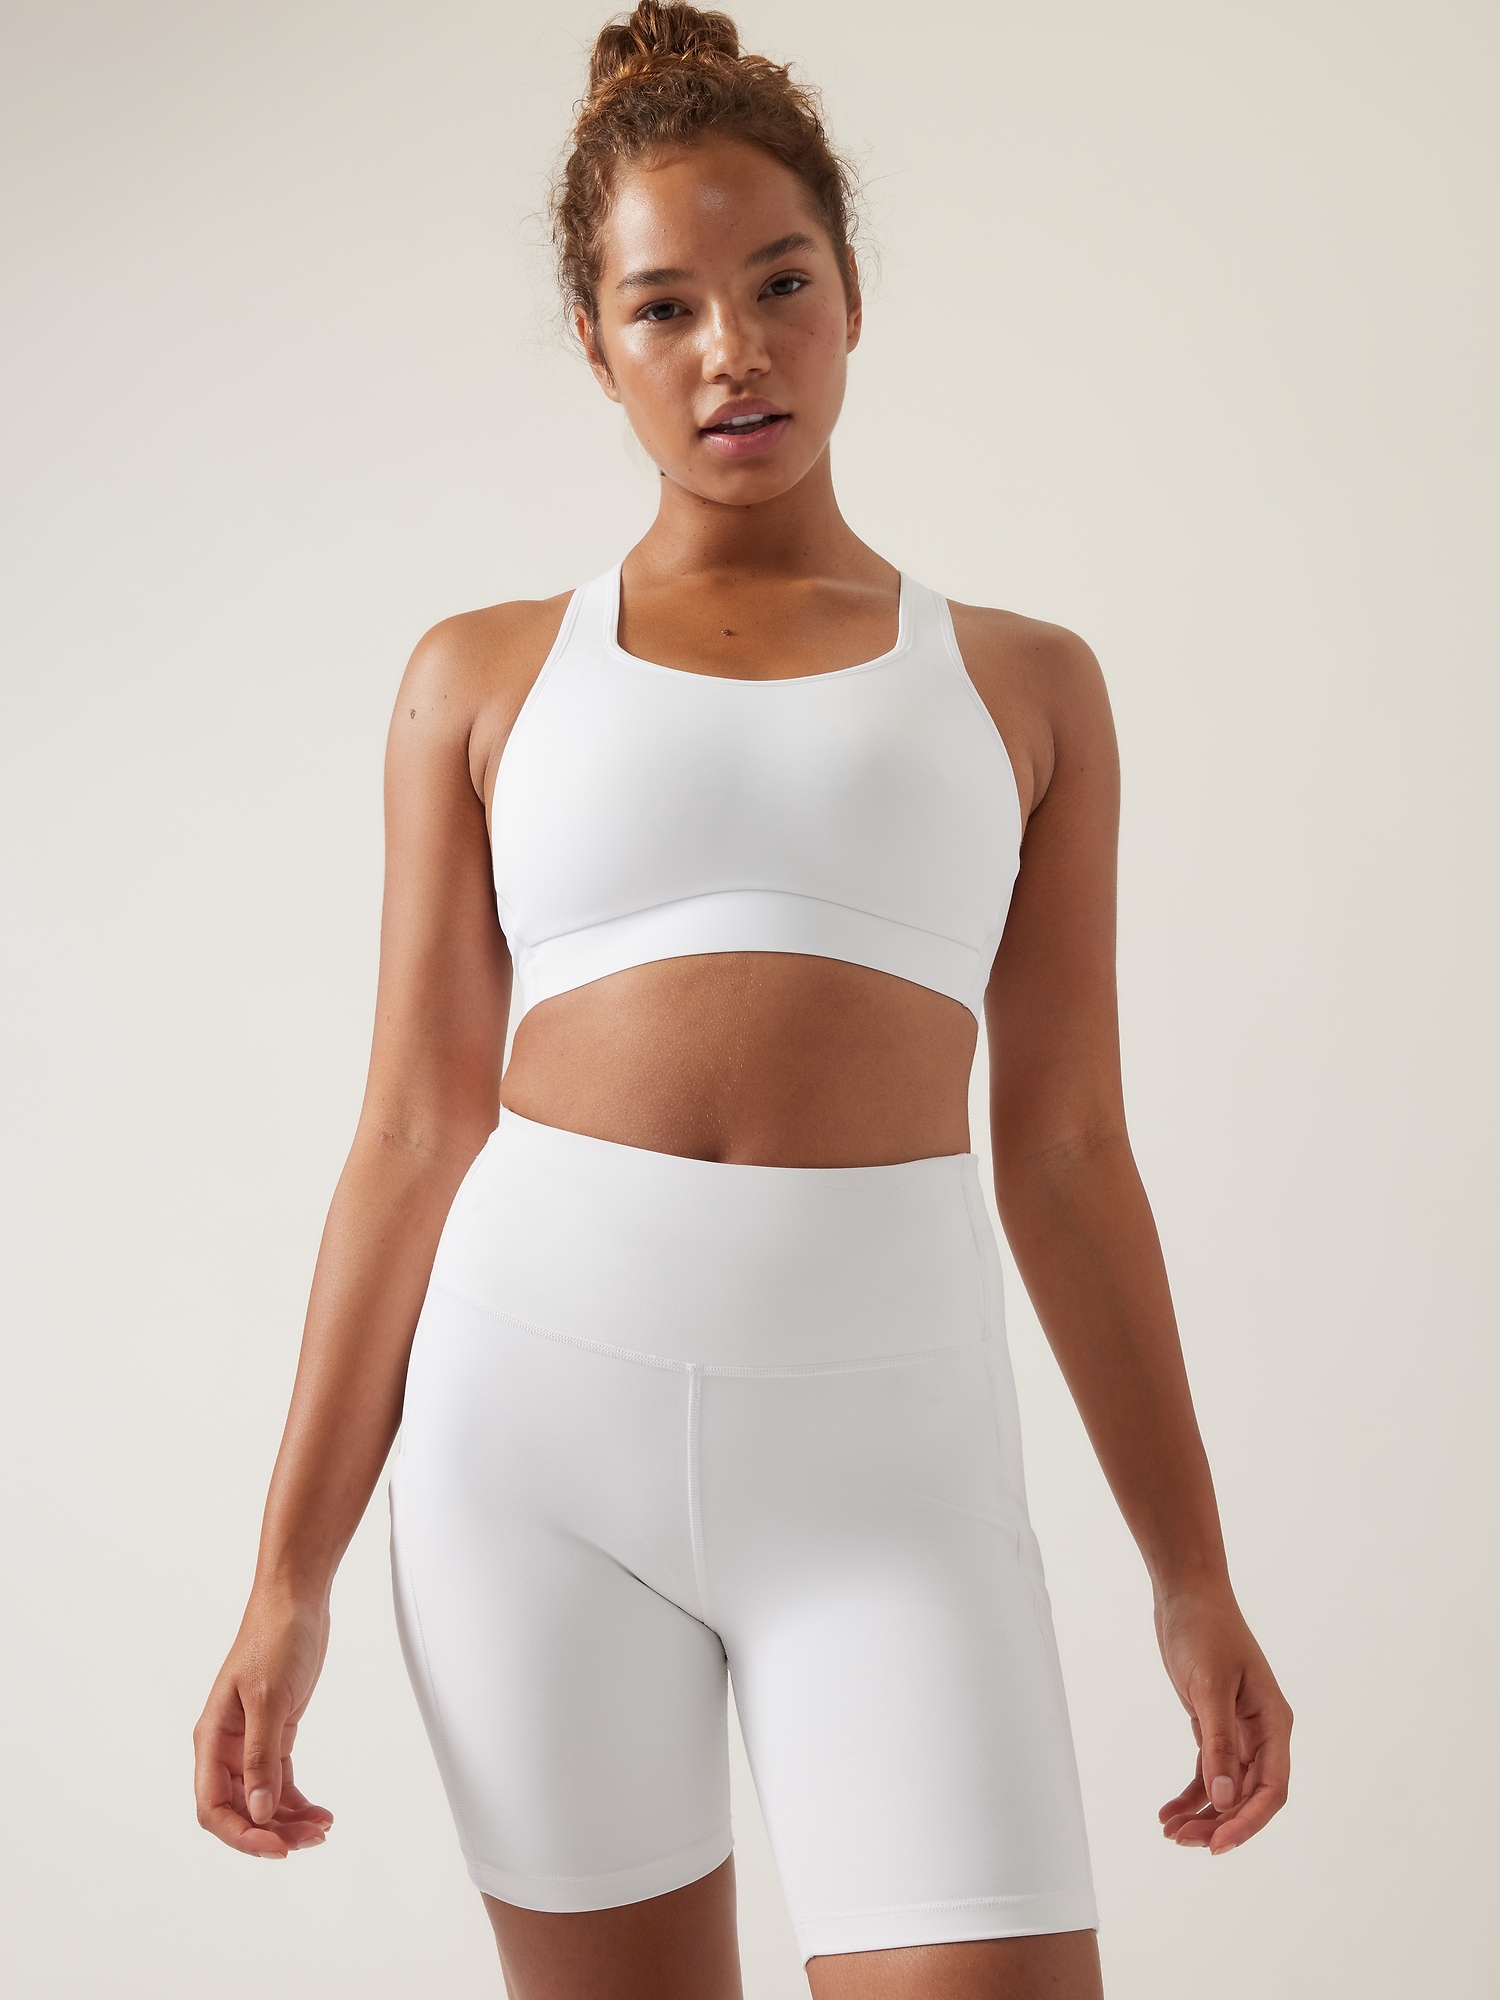 Barely There 2.0 Elevate Sports Bra, Greatly & Co.